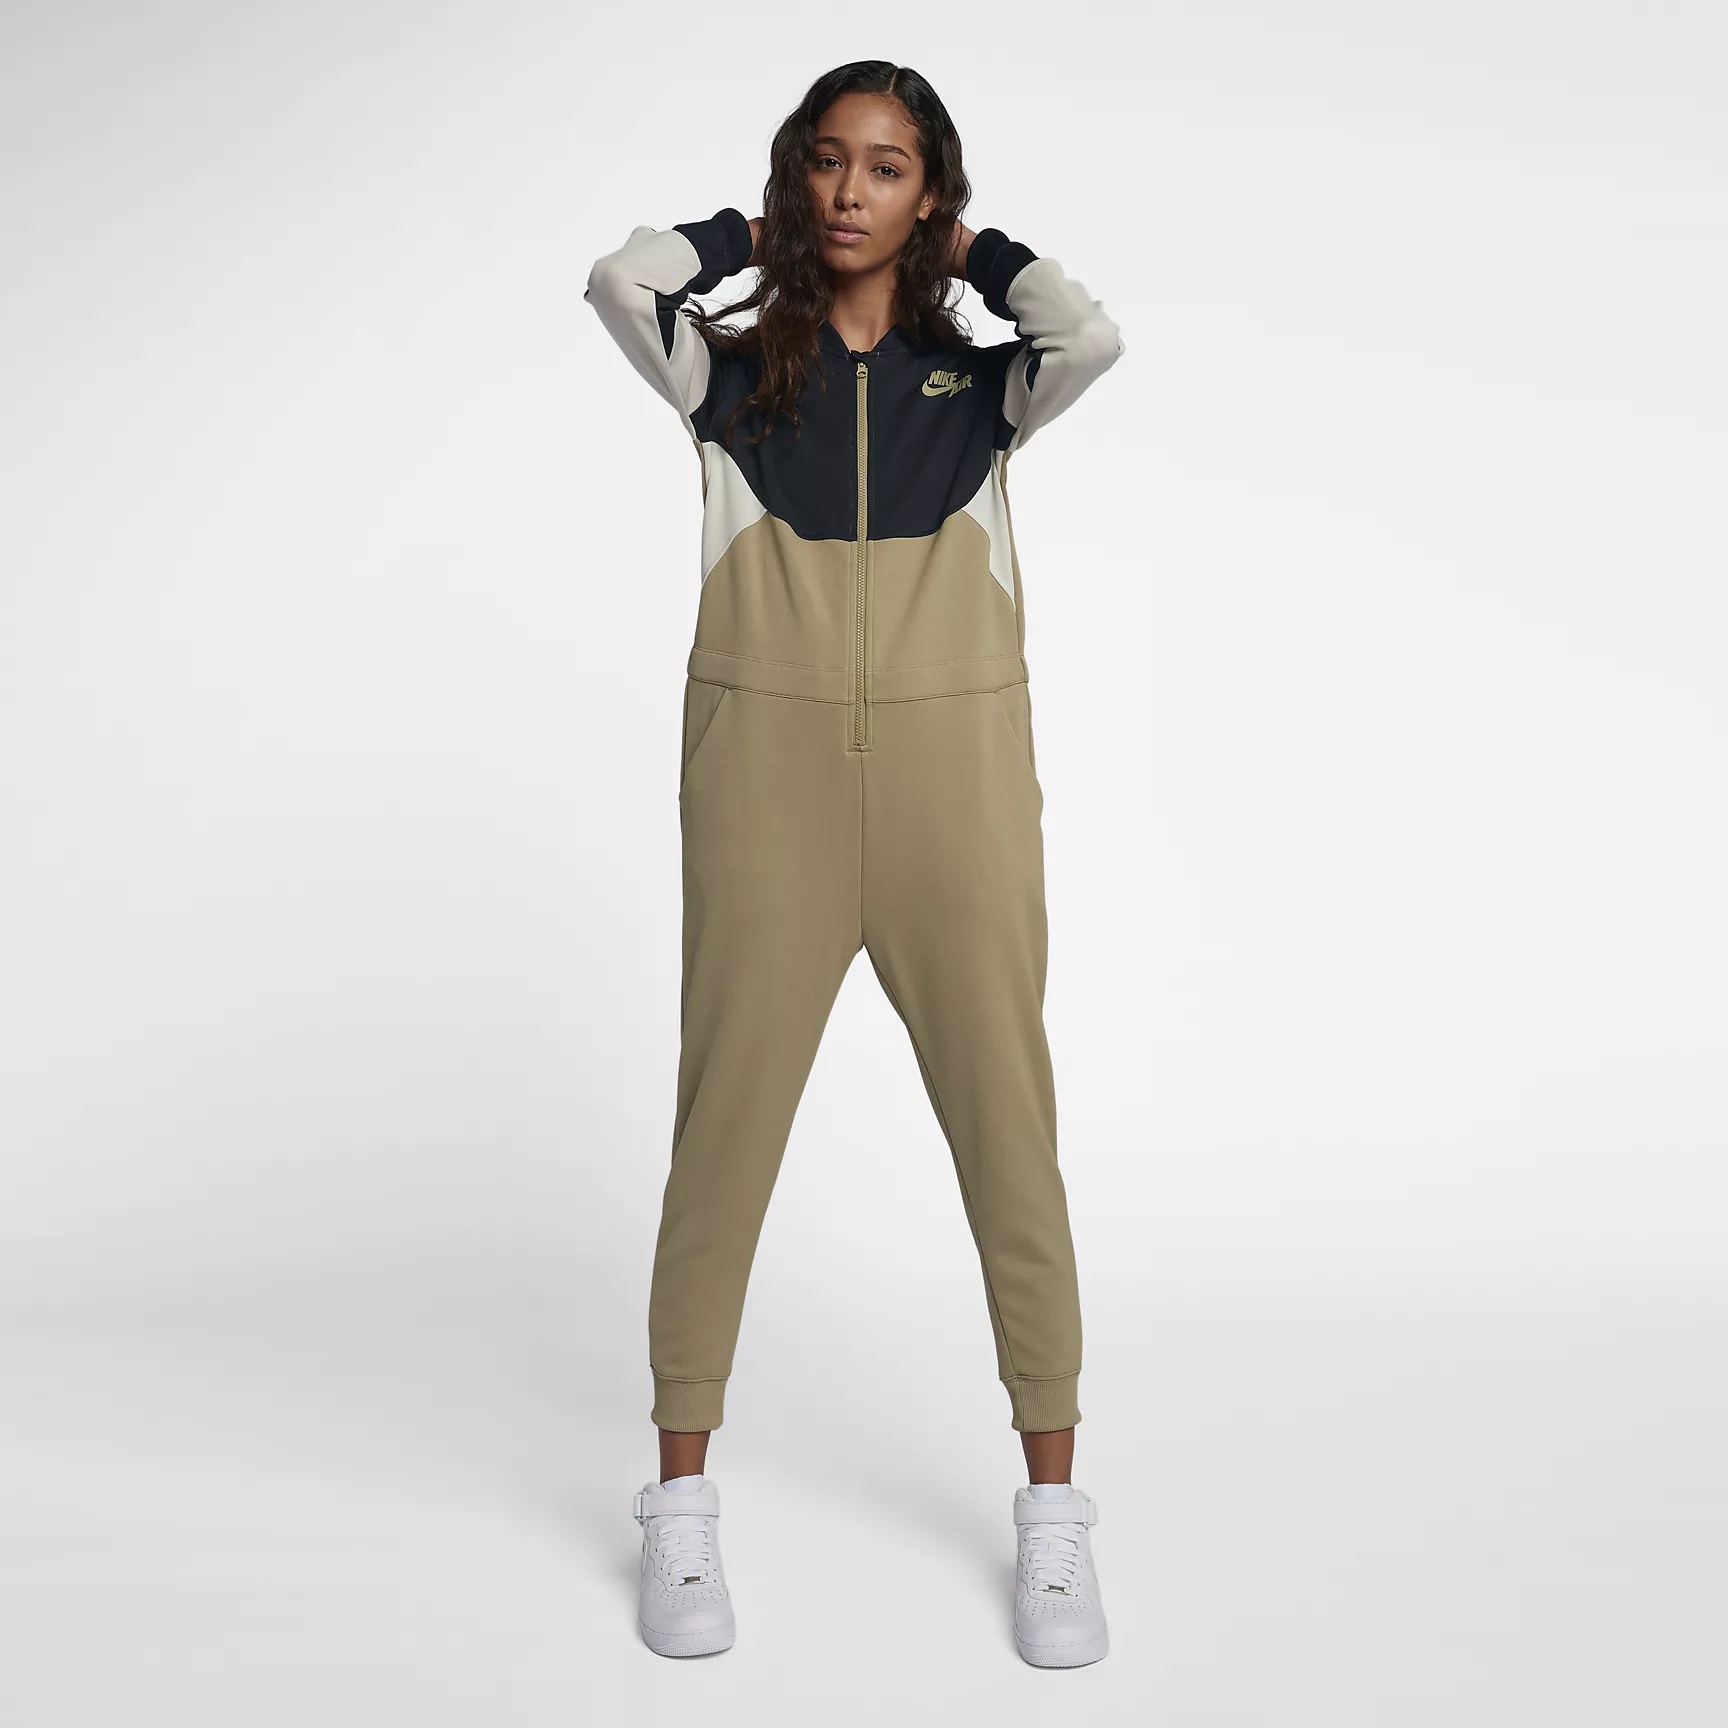 Nike Reveals Super Cute Convertible Jumpsuit For Spring 2018